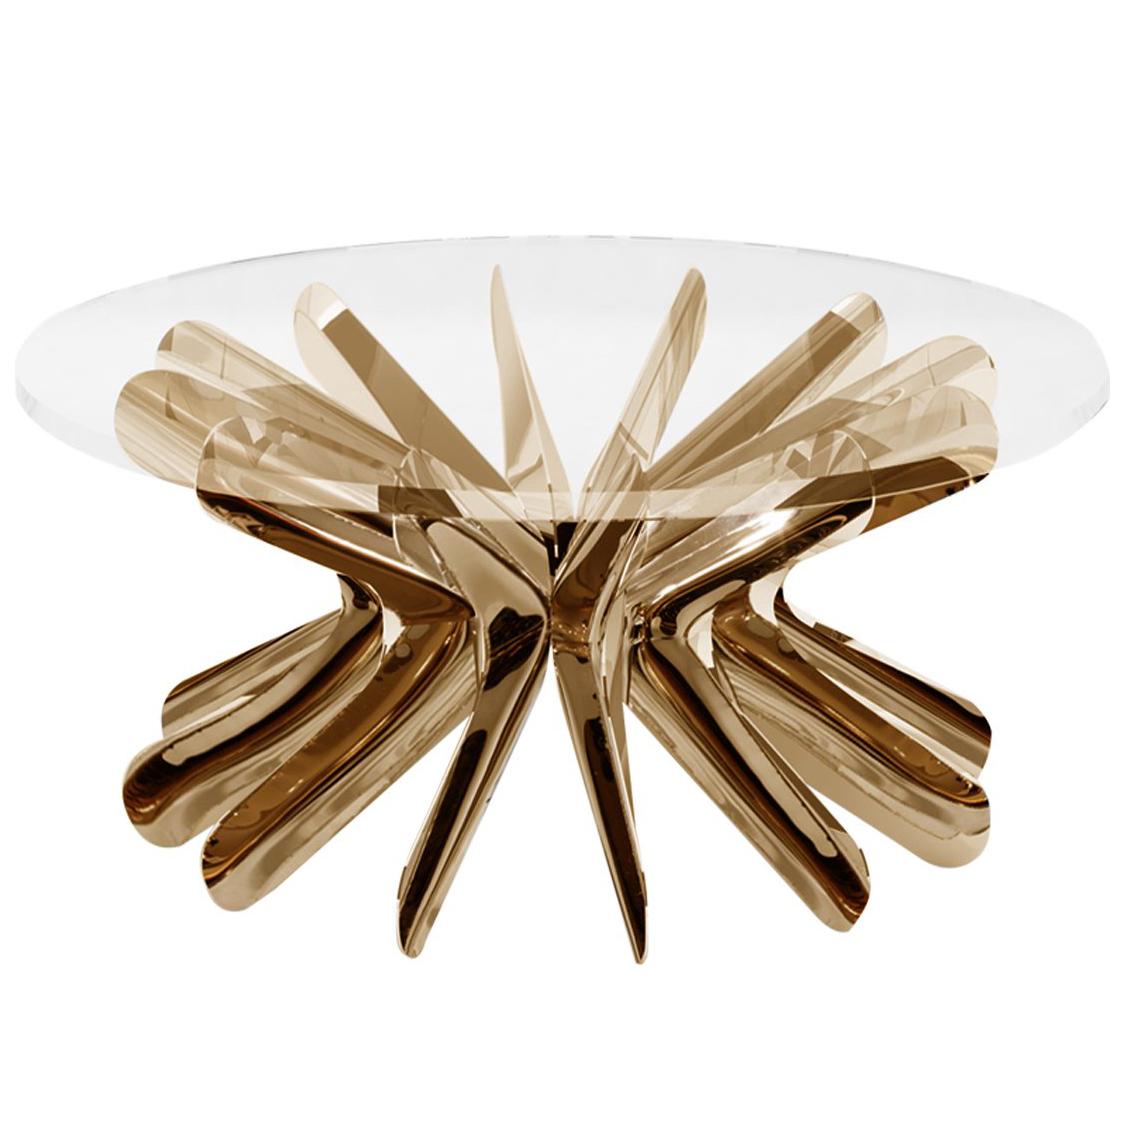 Limited Edition Large Steel in Rotation Coffee Table in Lacquered Copper, Zieta For Sale